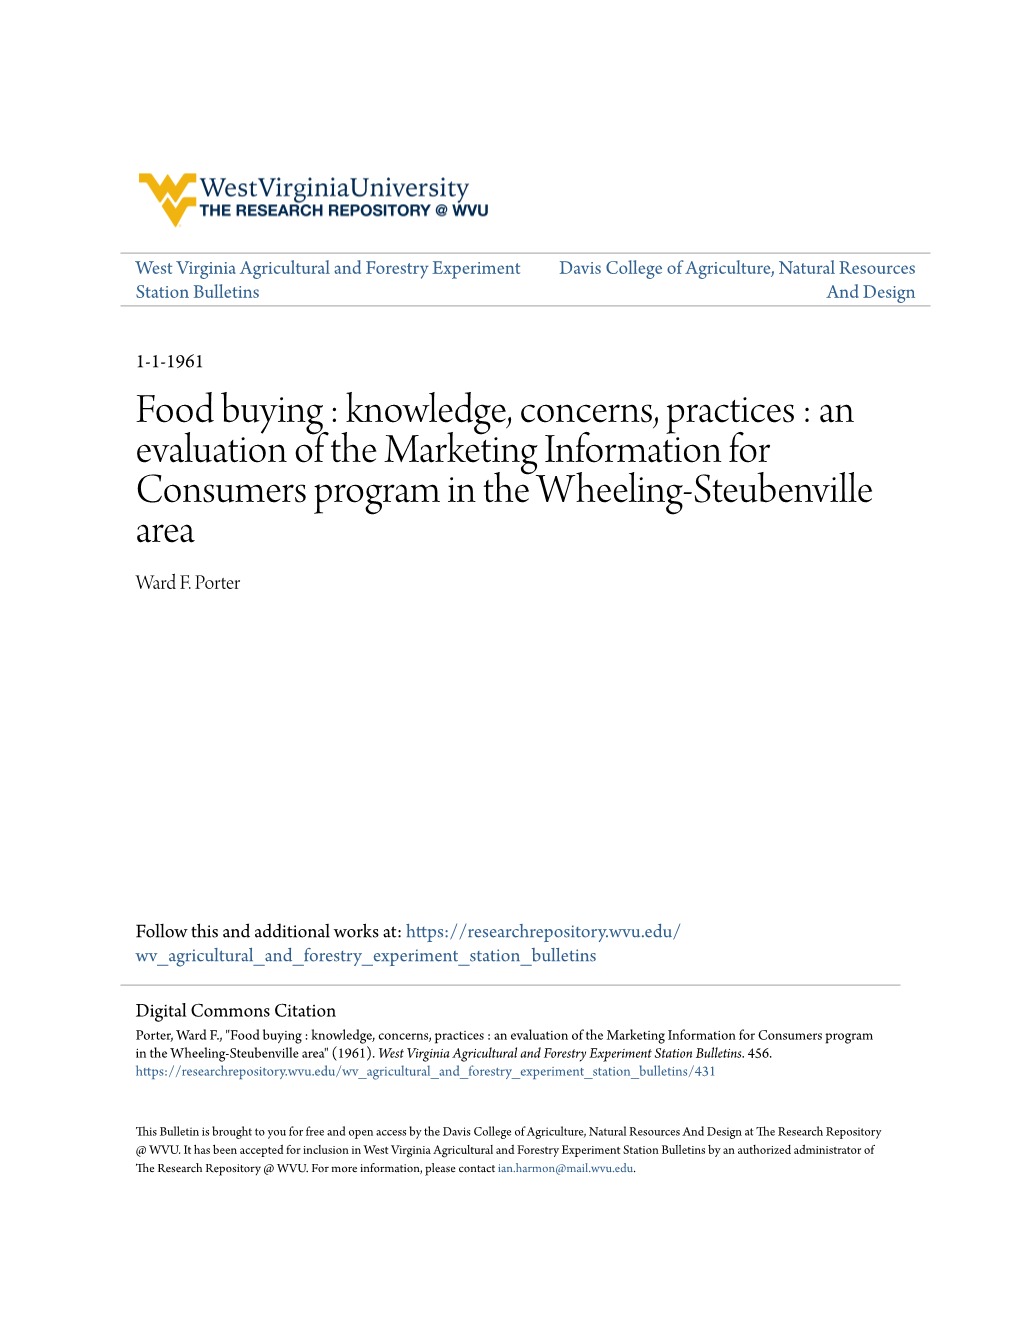 Food Buying : Knowledge, Concerns, Practices : an Evaluation of the Marketing Information for Consumers Program in the Wheeling-Steubenville Area Ward F